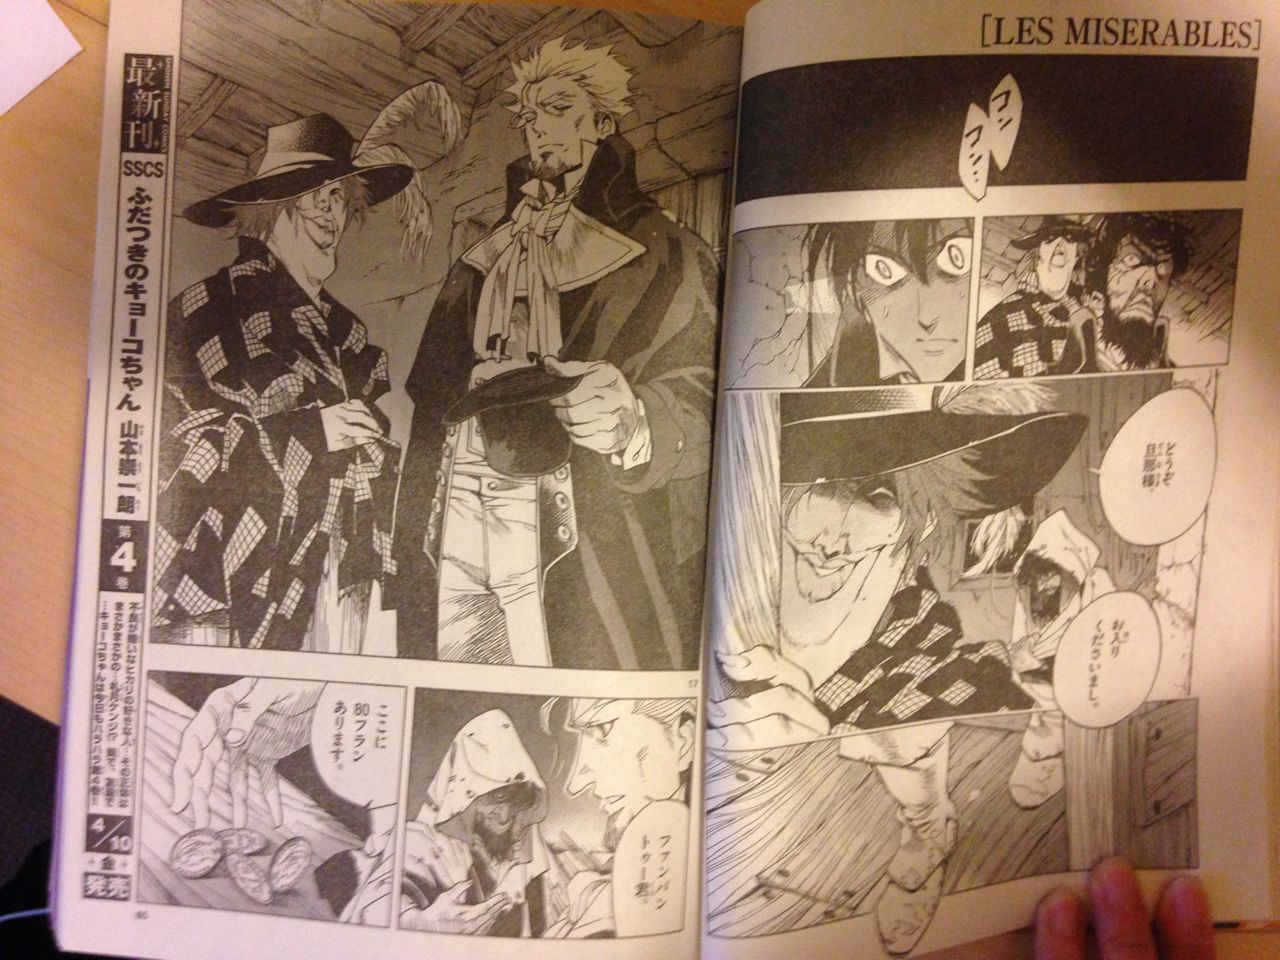 Tumbling Over My Own Feet Les Mis Manga Book 3 Chapter 5 Overview